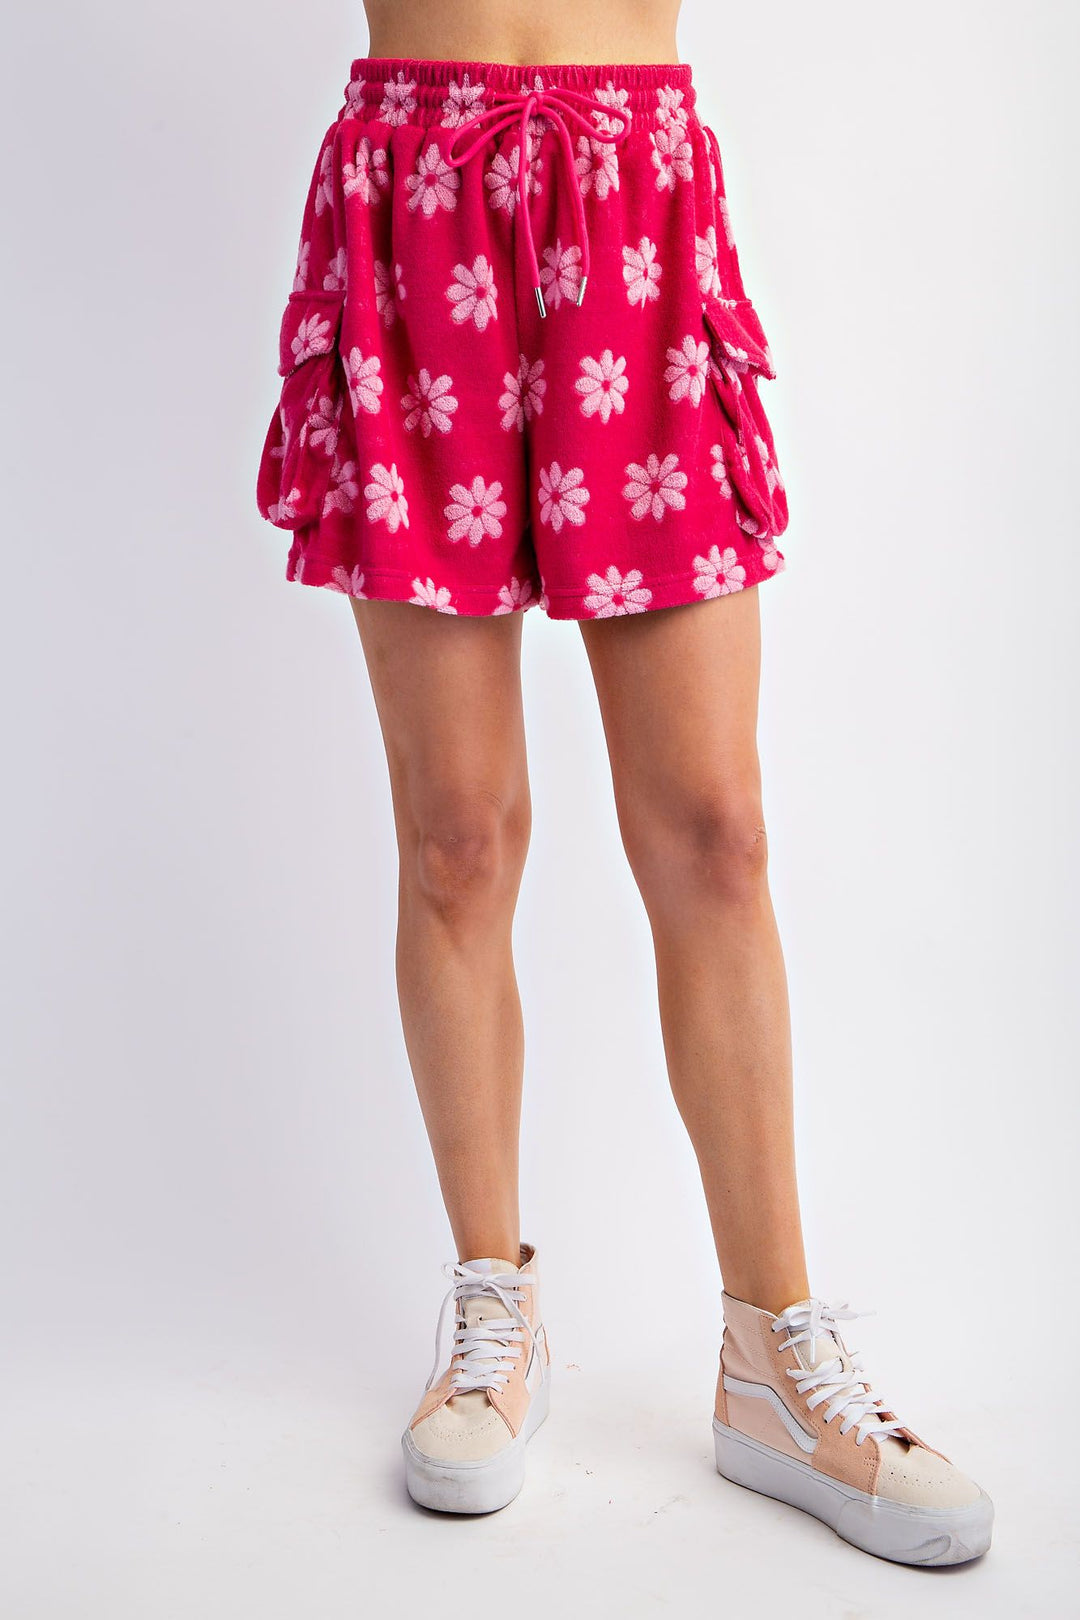 Flower Patterned French Terry Shorts - 2 Color Options - FINAL SALE